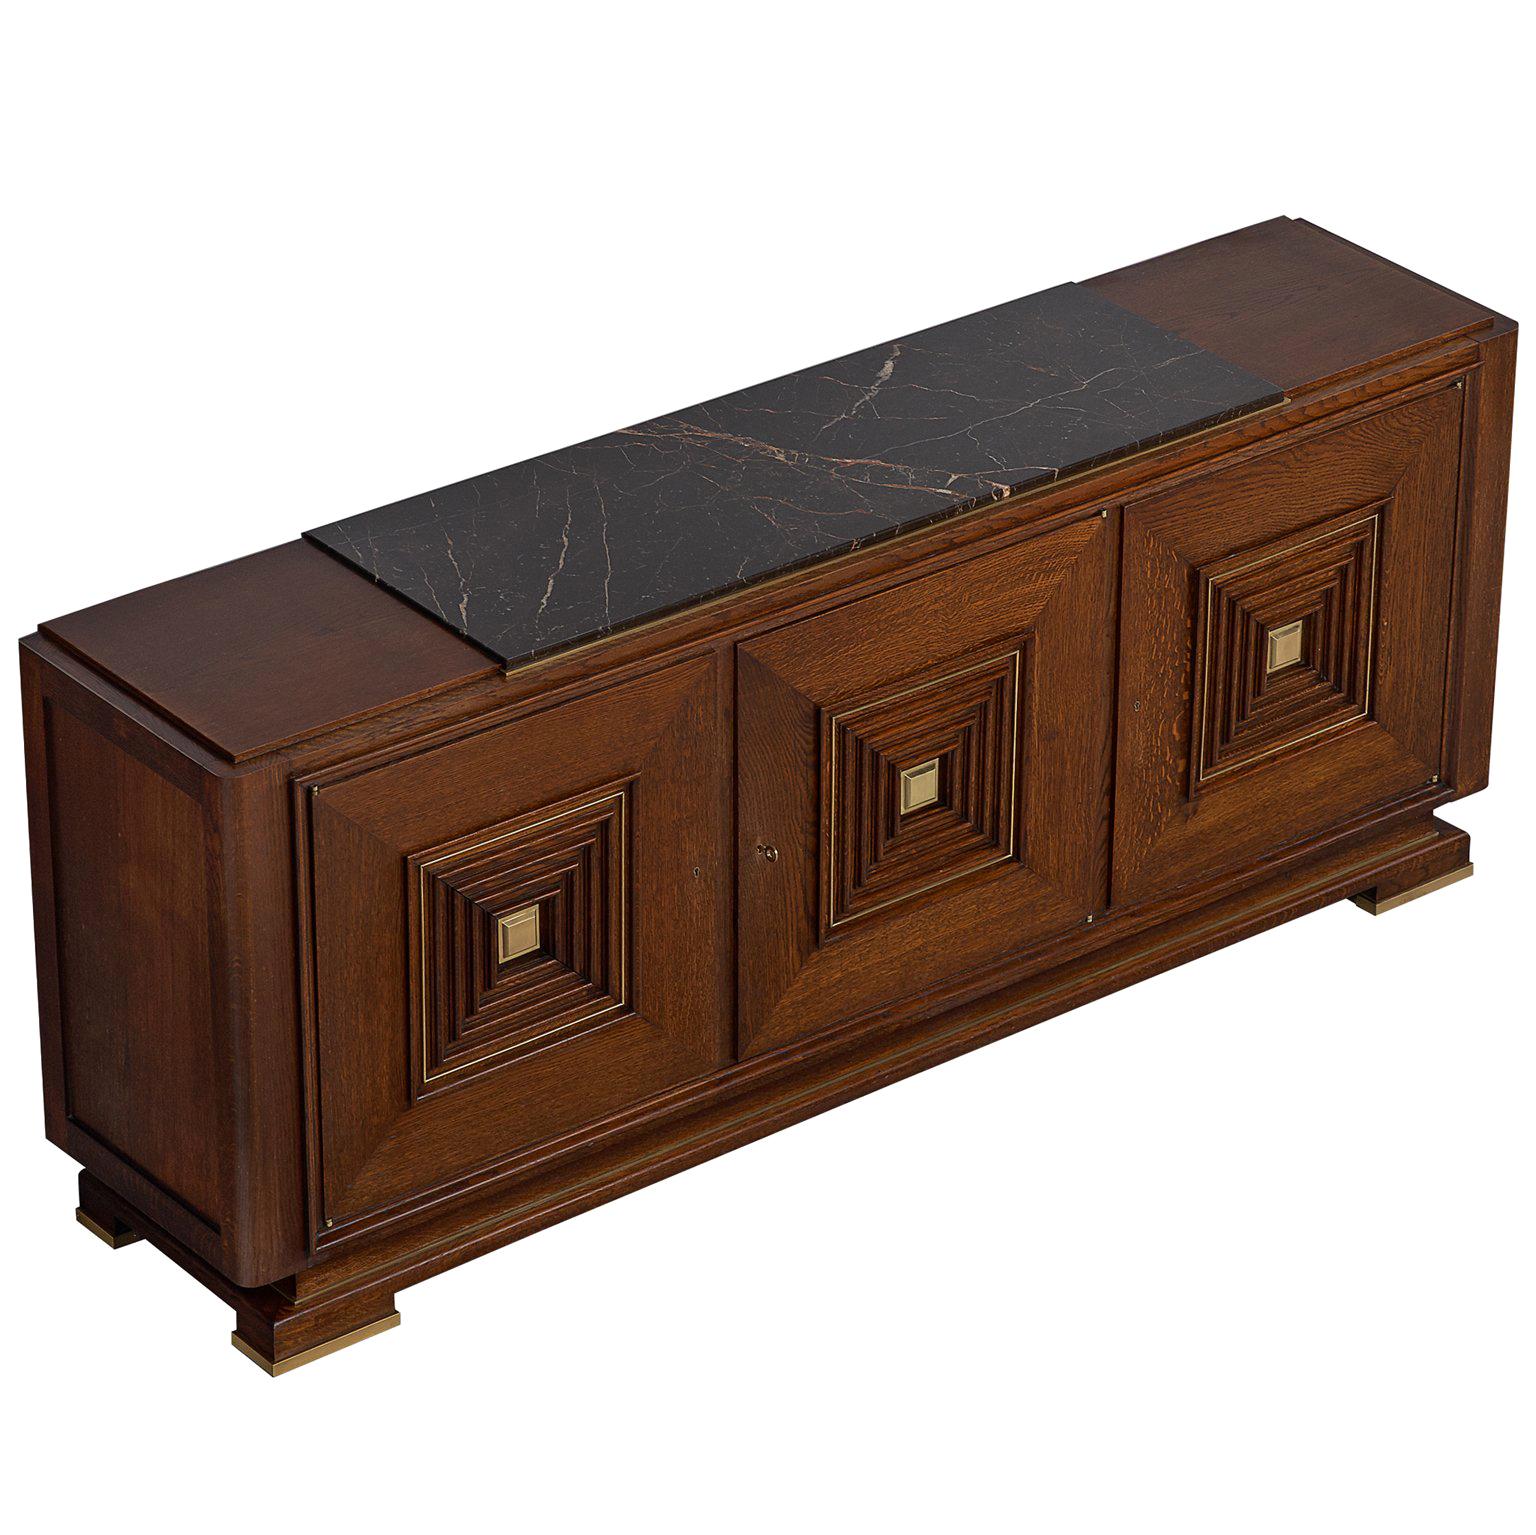 Art Deco Credenza in Oak with Marble Top and Brass Details, 1930s